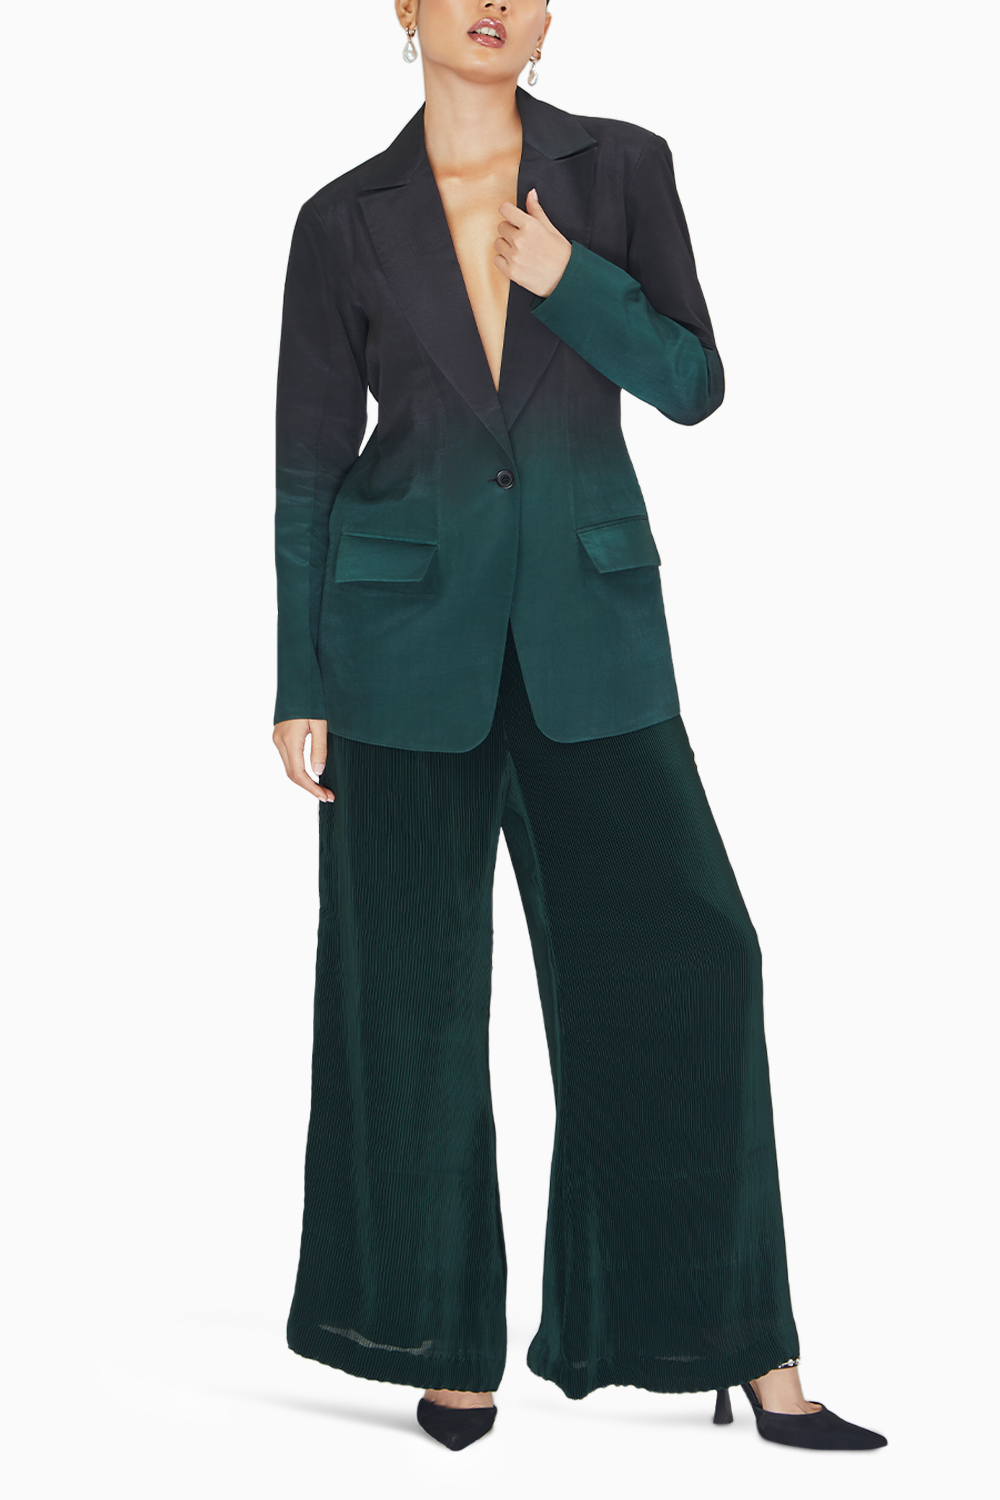 Emerald Ombre Blazer with Pants Set